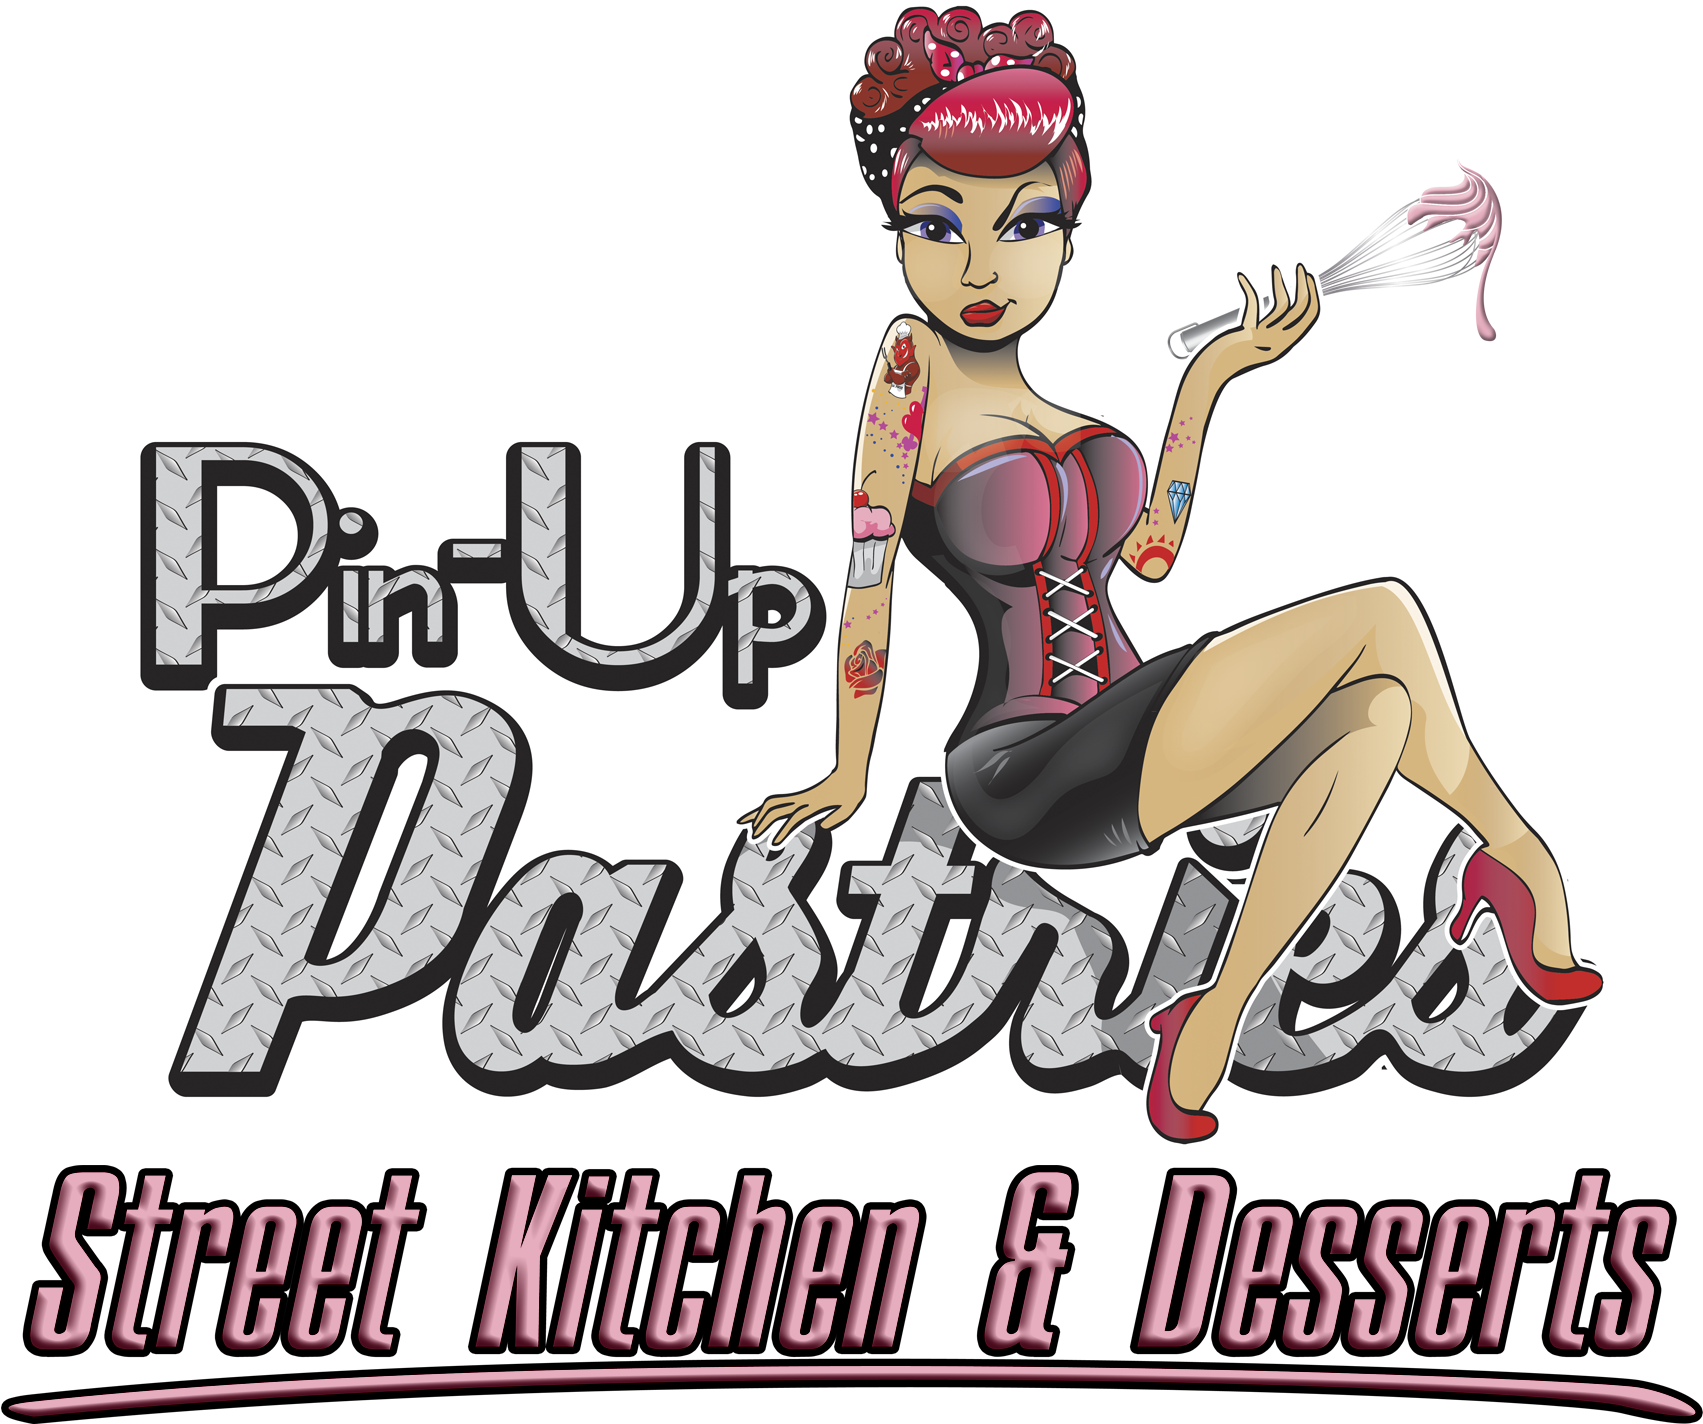 Pin Up Pastries Tucson - Pin Up Pastries (1800x1510)